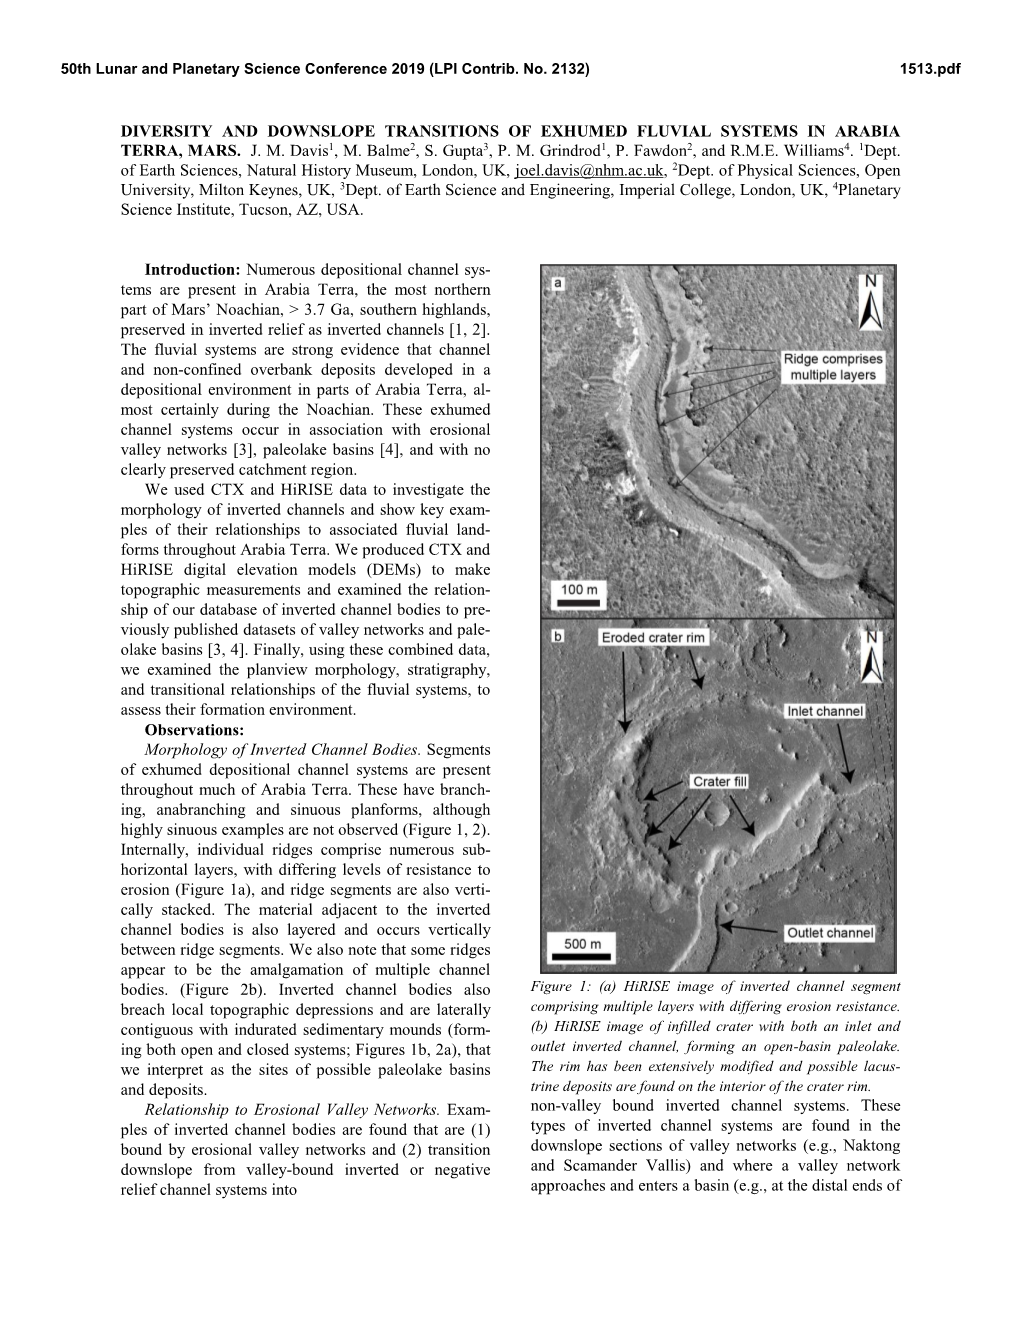 Diversity and Downslope Transitions of Exhumed Fluvial Systems in Arabia Terra, Mars